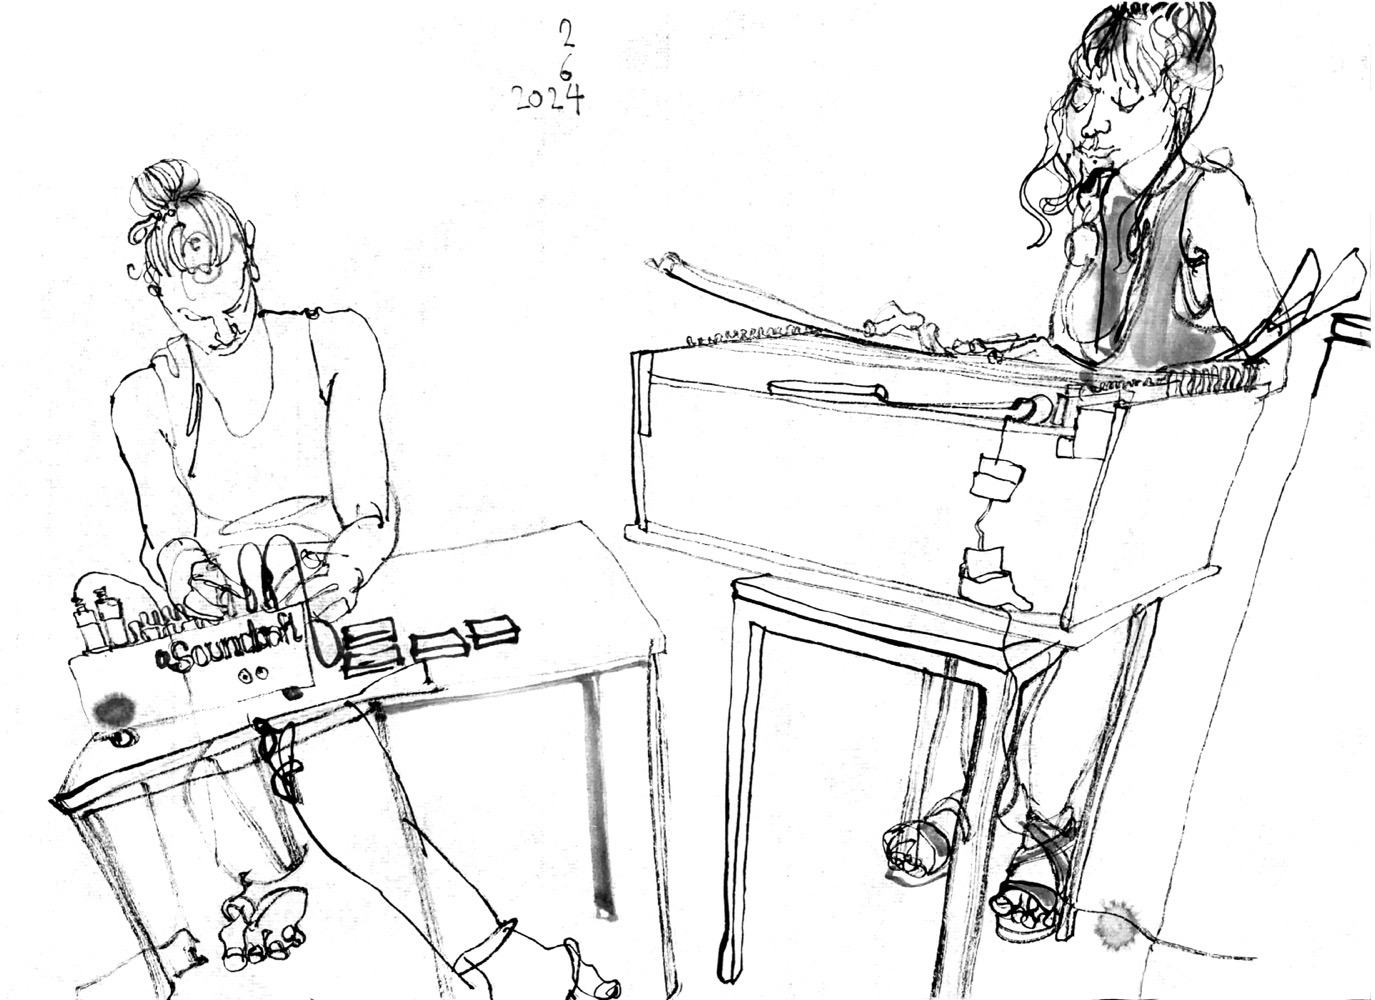 Ink drawing of two musicians, to the left a woman sitting at a desk, some minidiscs lying on it aside some electronic device, she is playing, at the right another woman standing at a stringbox, playing it with a bow.